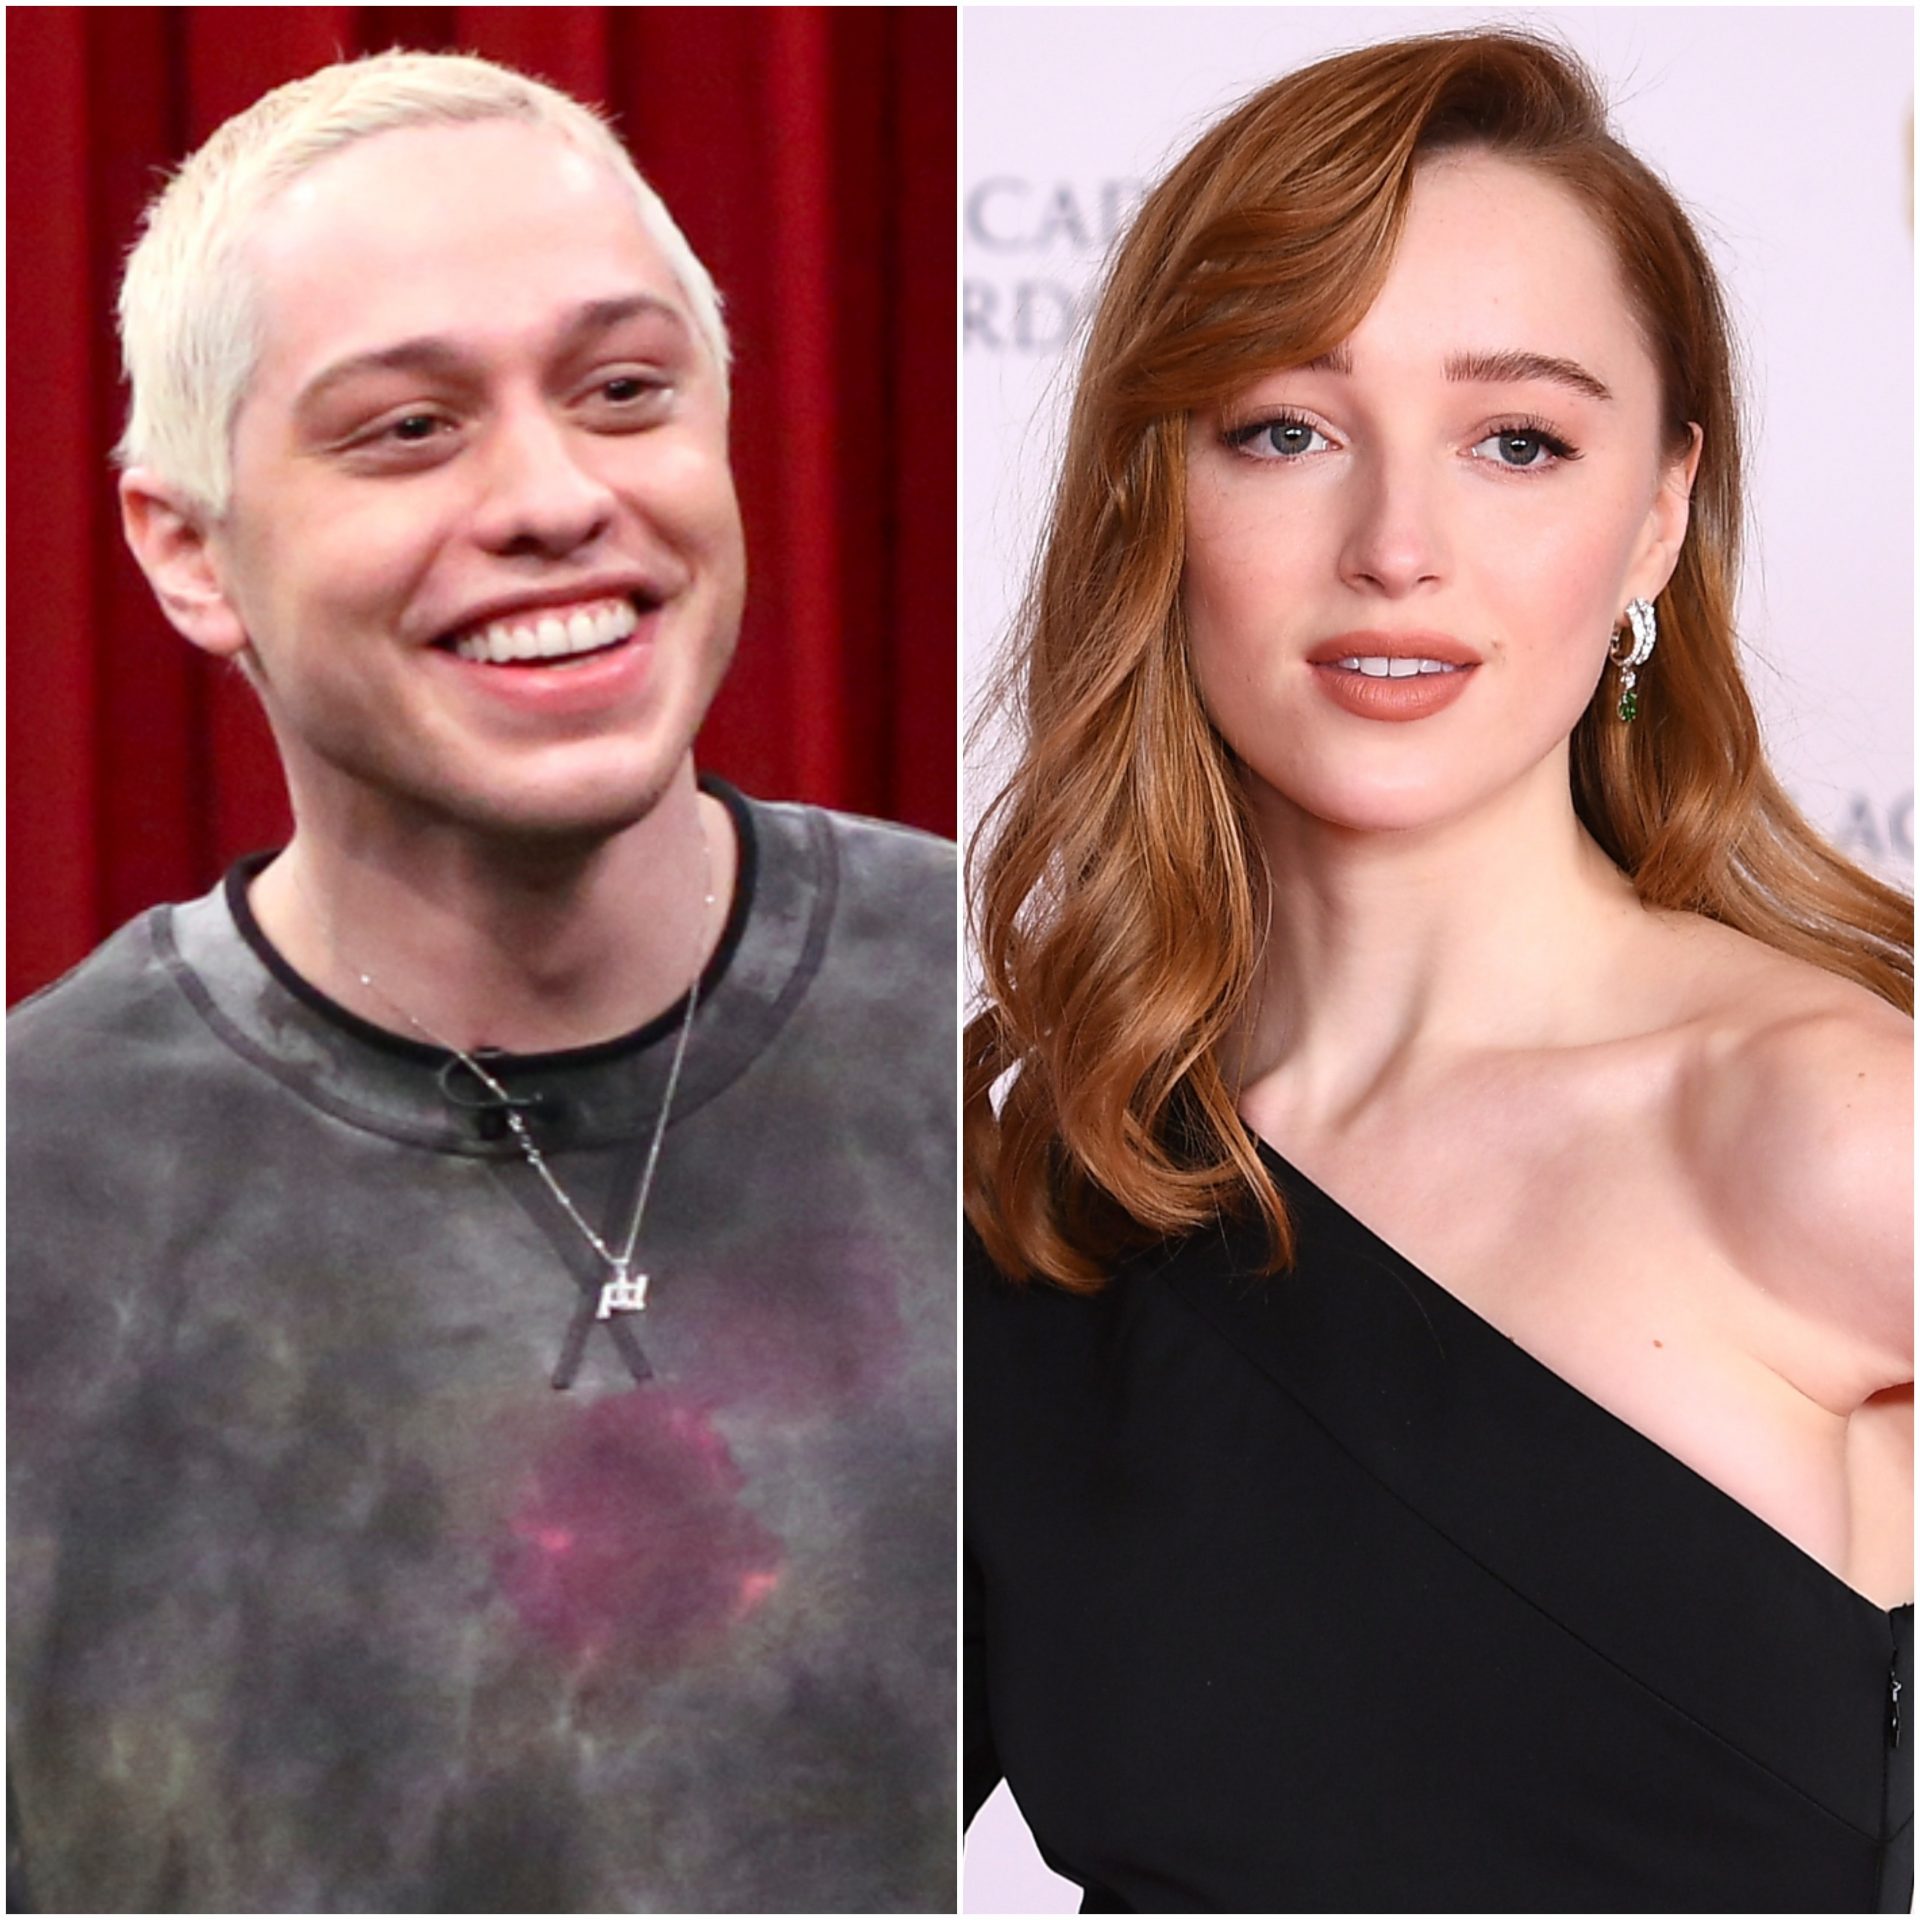 Are Pete Davidson and Phoebe Dynevor Dating? Let’s Investigate